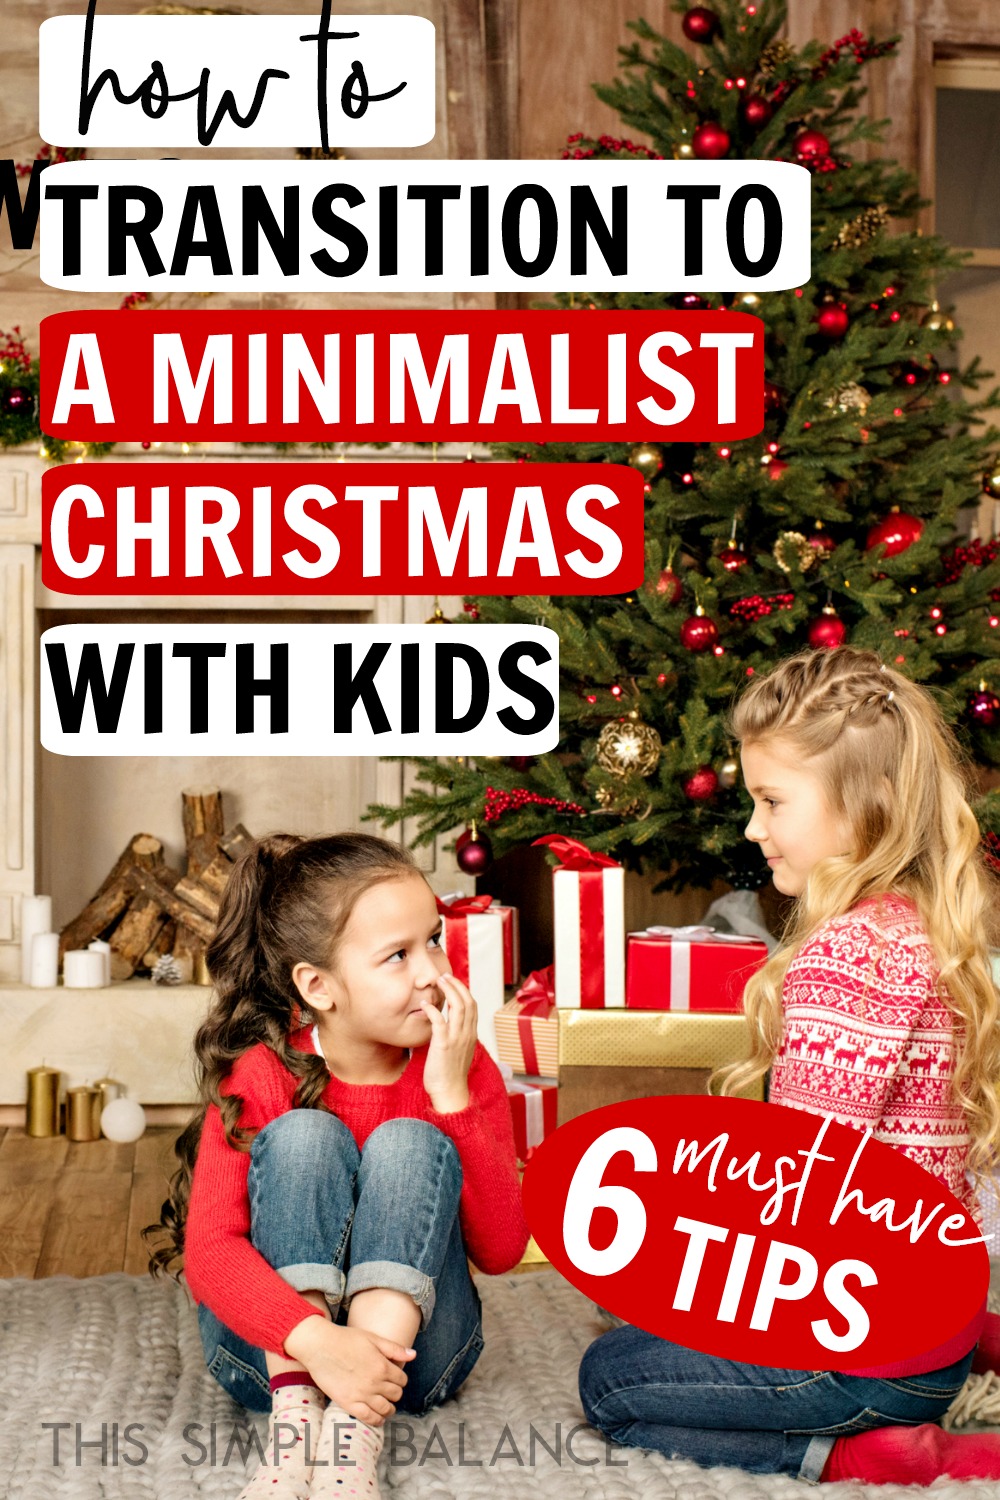 two young girls talking in front of Christmas presents, with text overlay, "how to transition to a minimalist Christmas with kids - 6 must have tips"